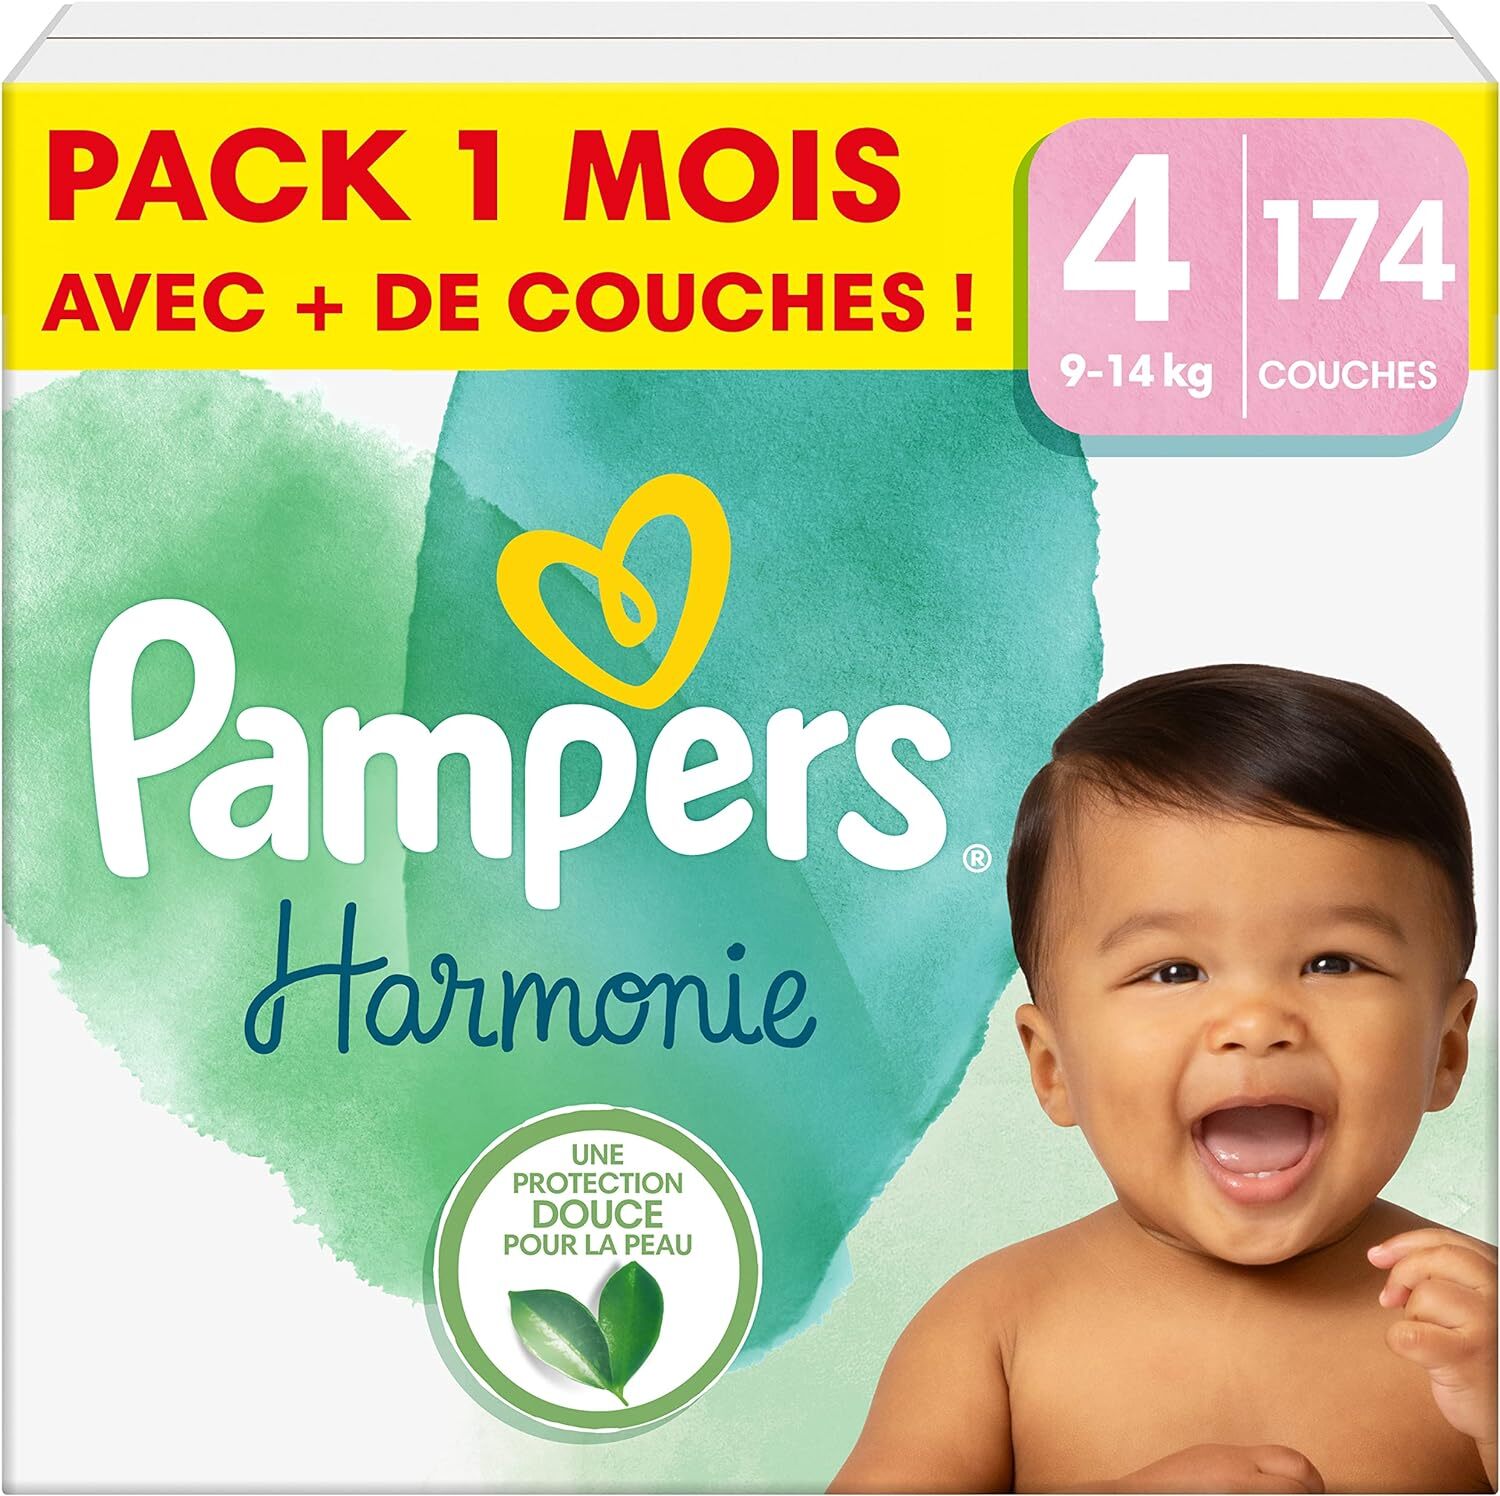 Pampers Couches Harmonie Pack 1 mois